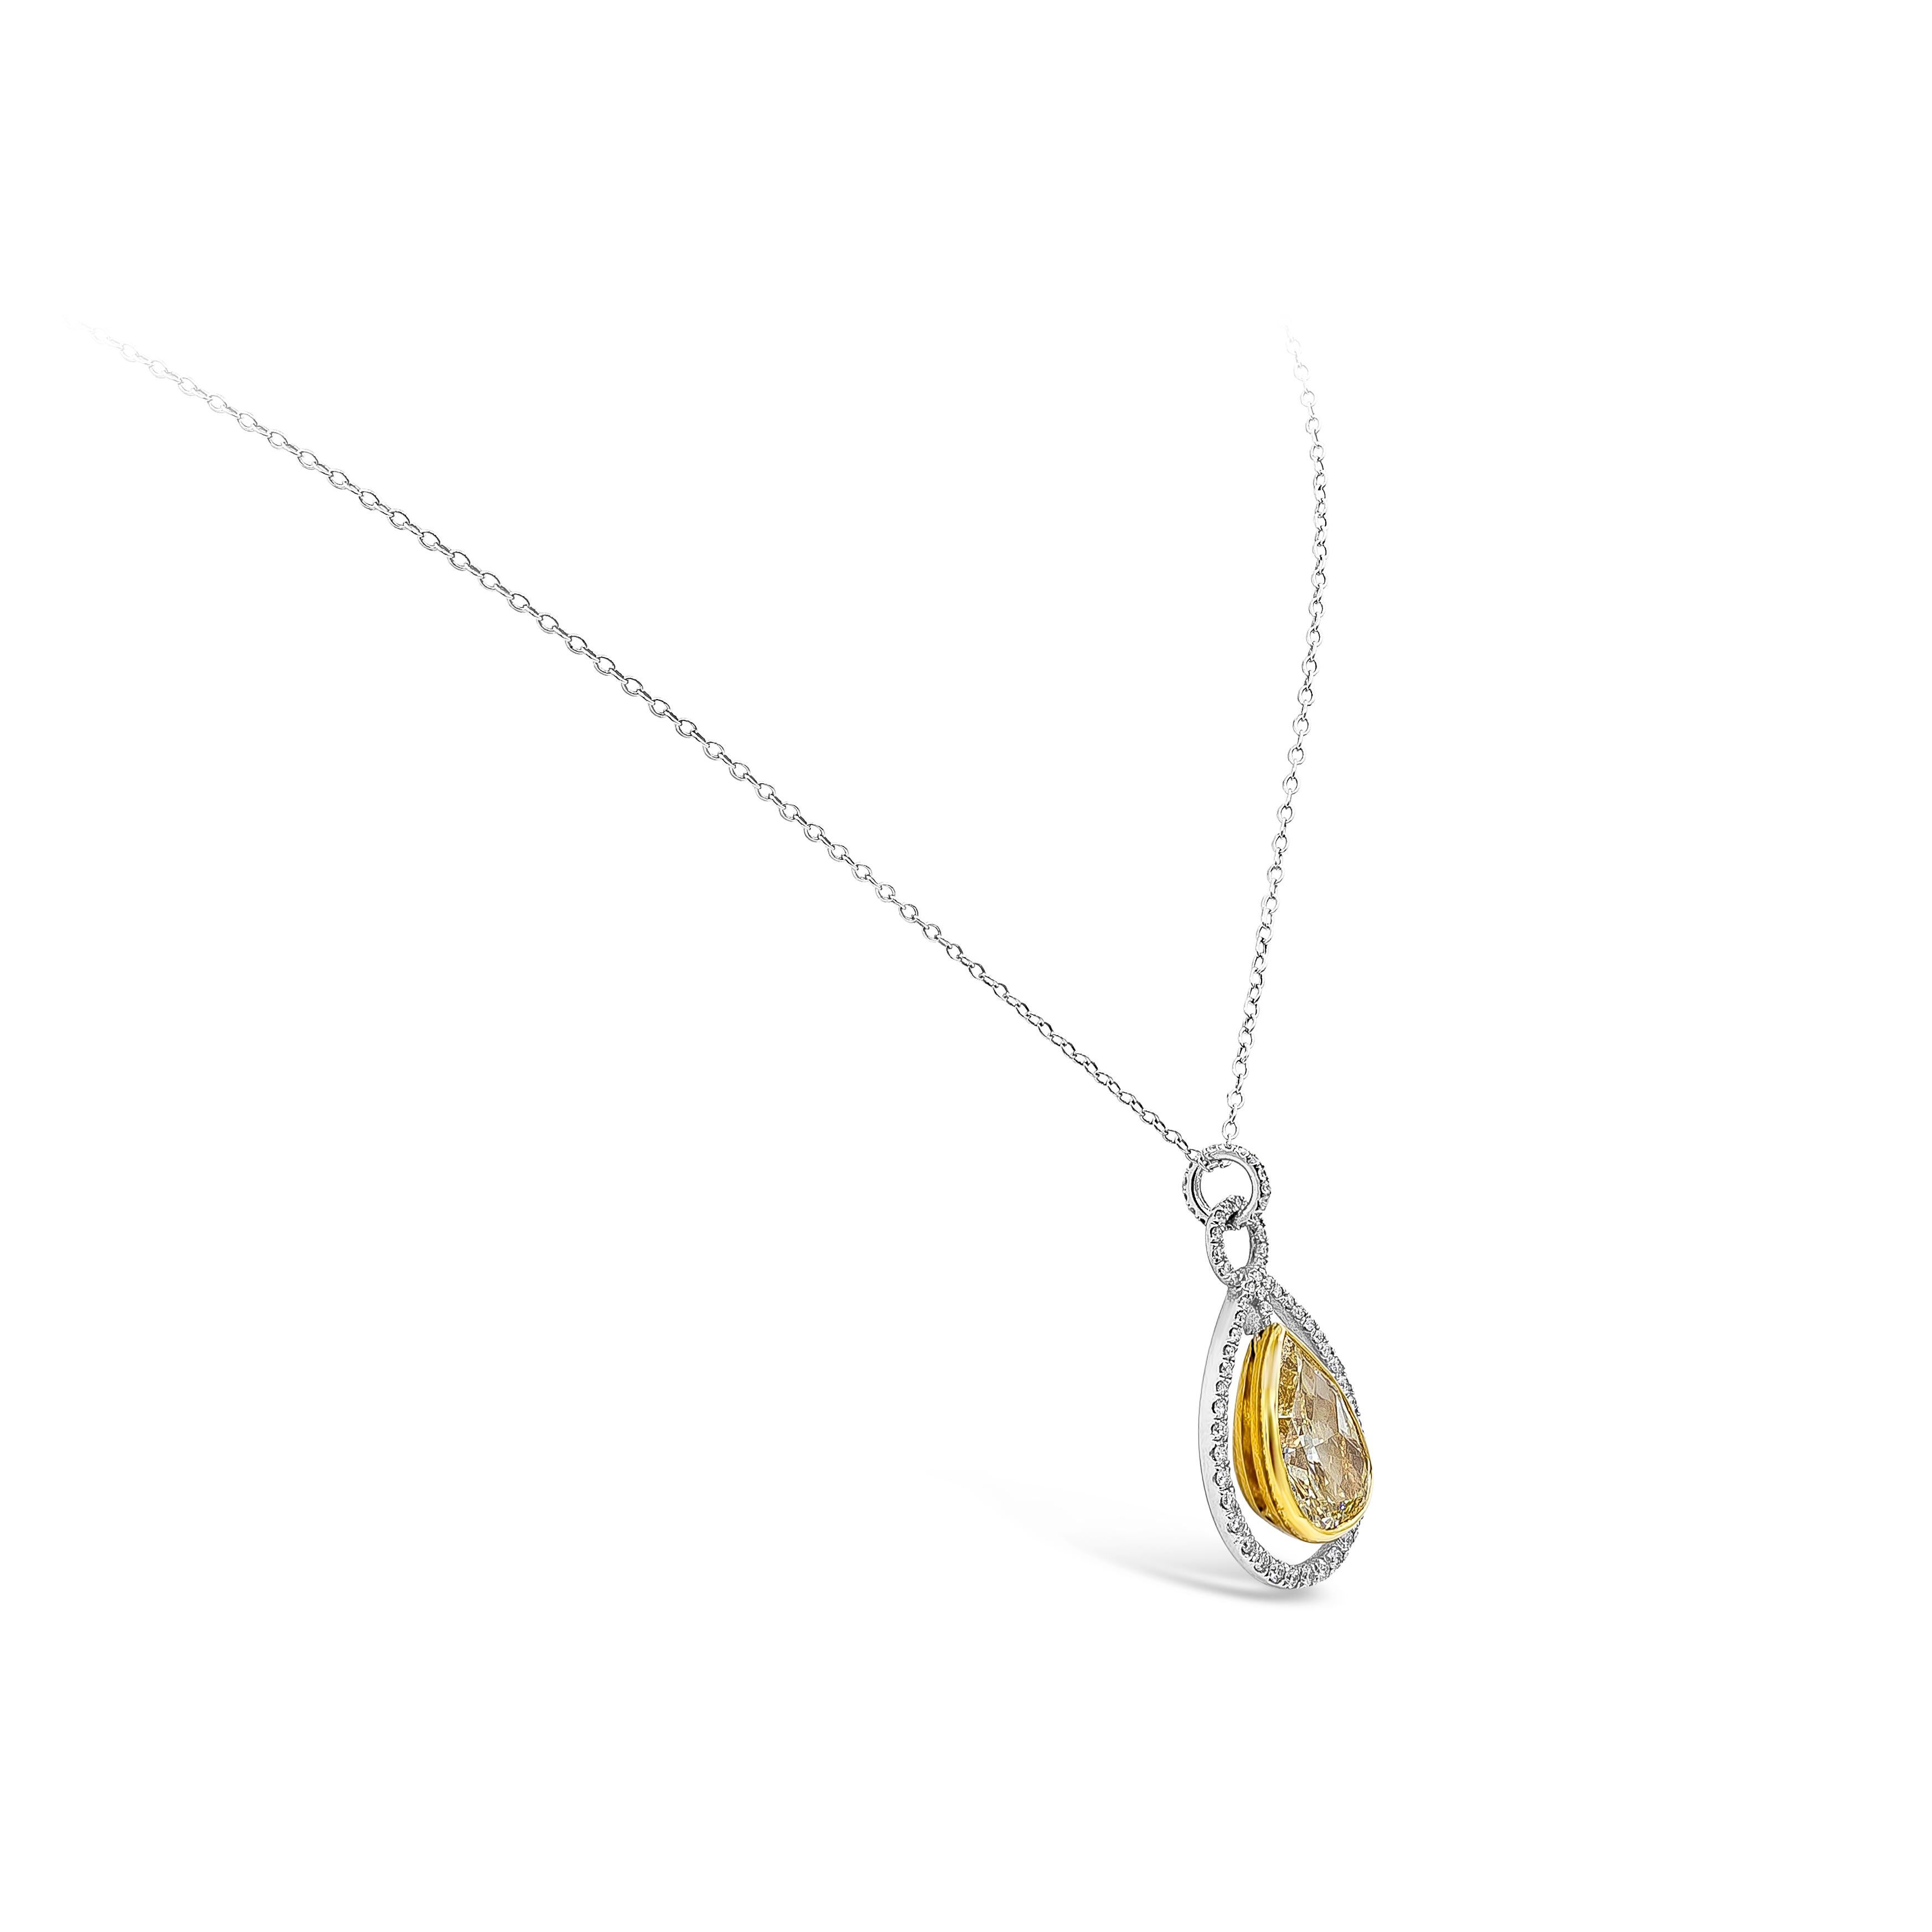 A special piece of jewelry showcasing a GIA certified beautiful pear shape yellow diamond weighing 5.25 carats, Y-Z color and Internally flawless in clarity. Set in a unique open-work halo design made in yellow gold and platinum. Suspended on an